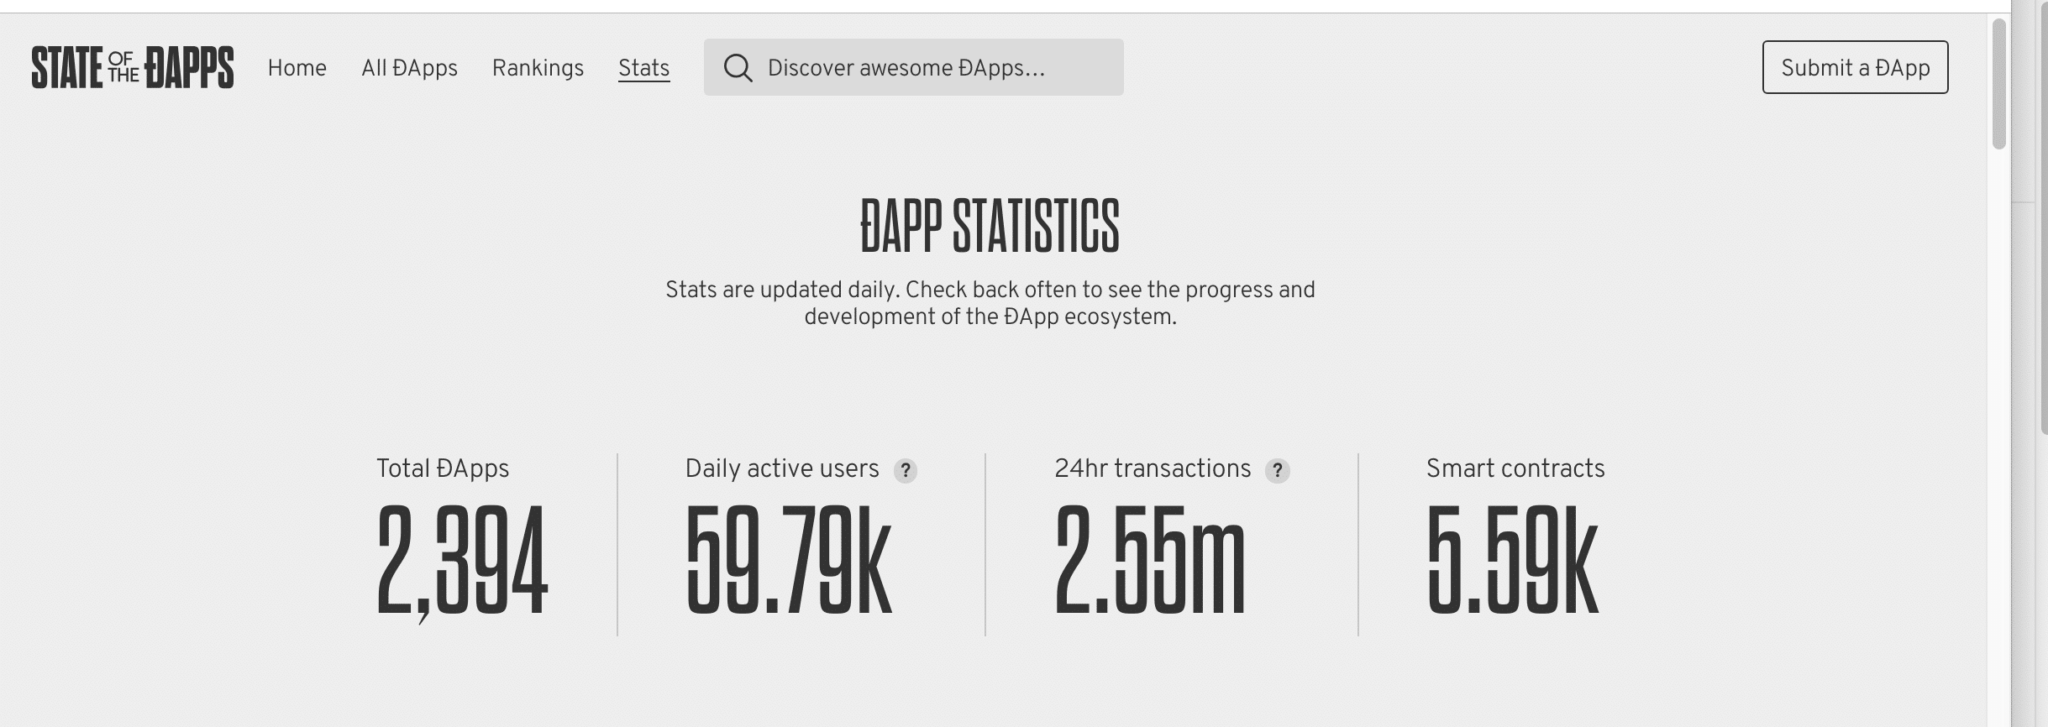 State of the Dapps stats